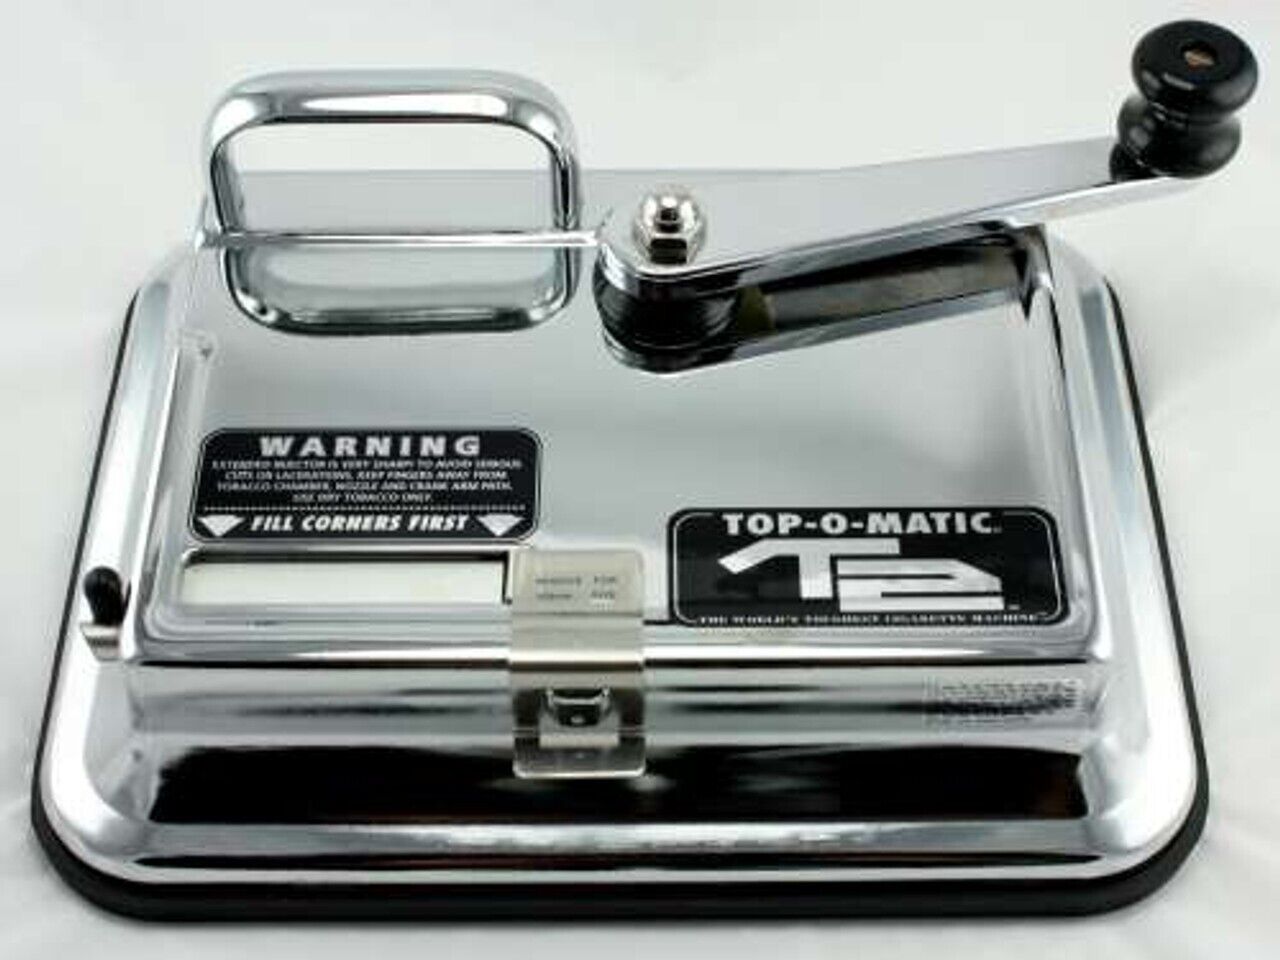 NEW TOP-O-MATIC CIGARETTE ROLLING MACHINE T2  SPECIAL EDITION